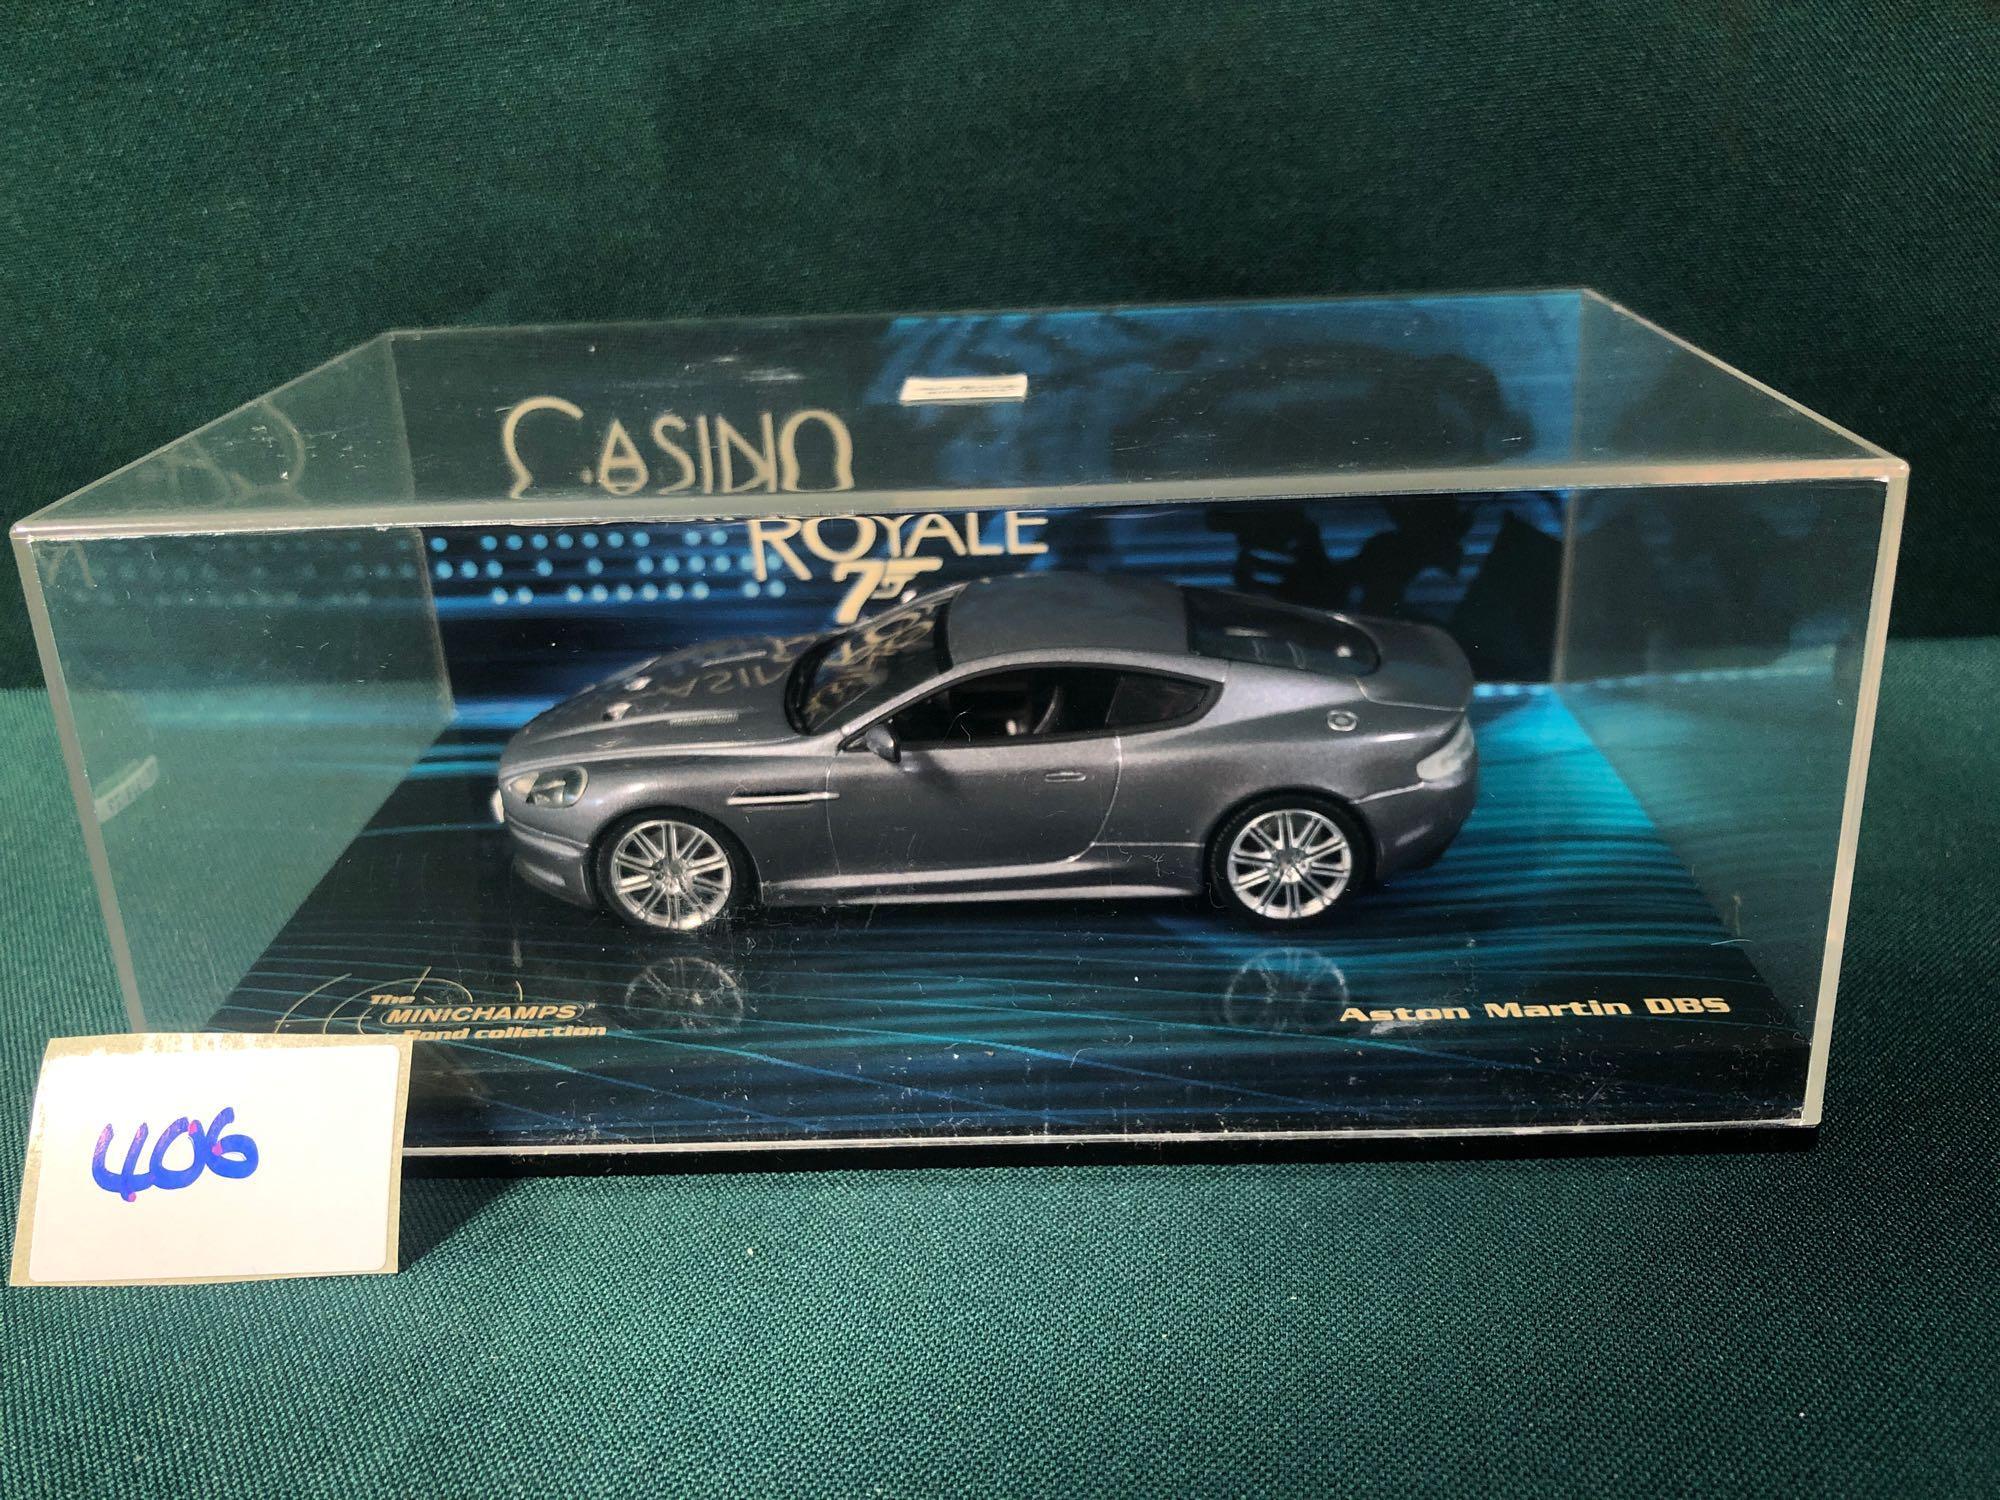 The Minichamps Bond Collection Diecast #436 137620 Aston Martin BDS From Casino Royal In Display